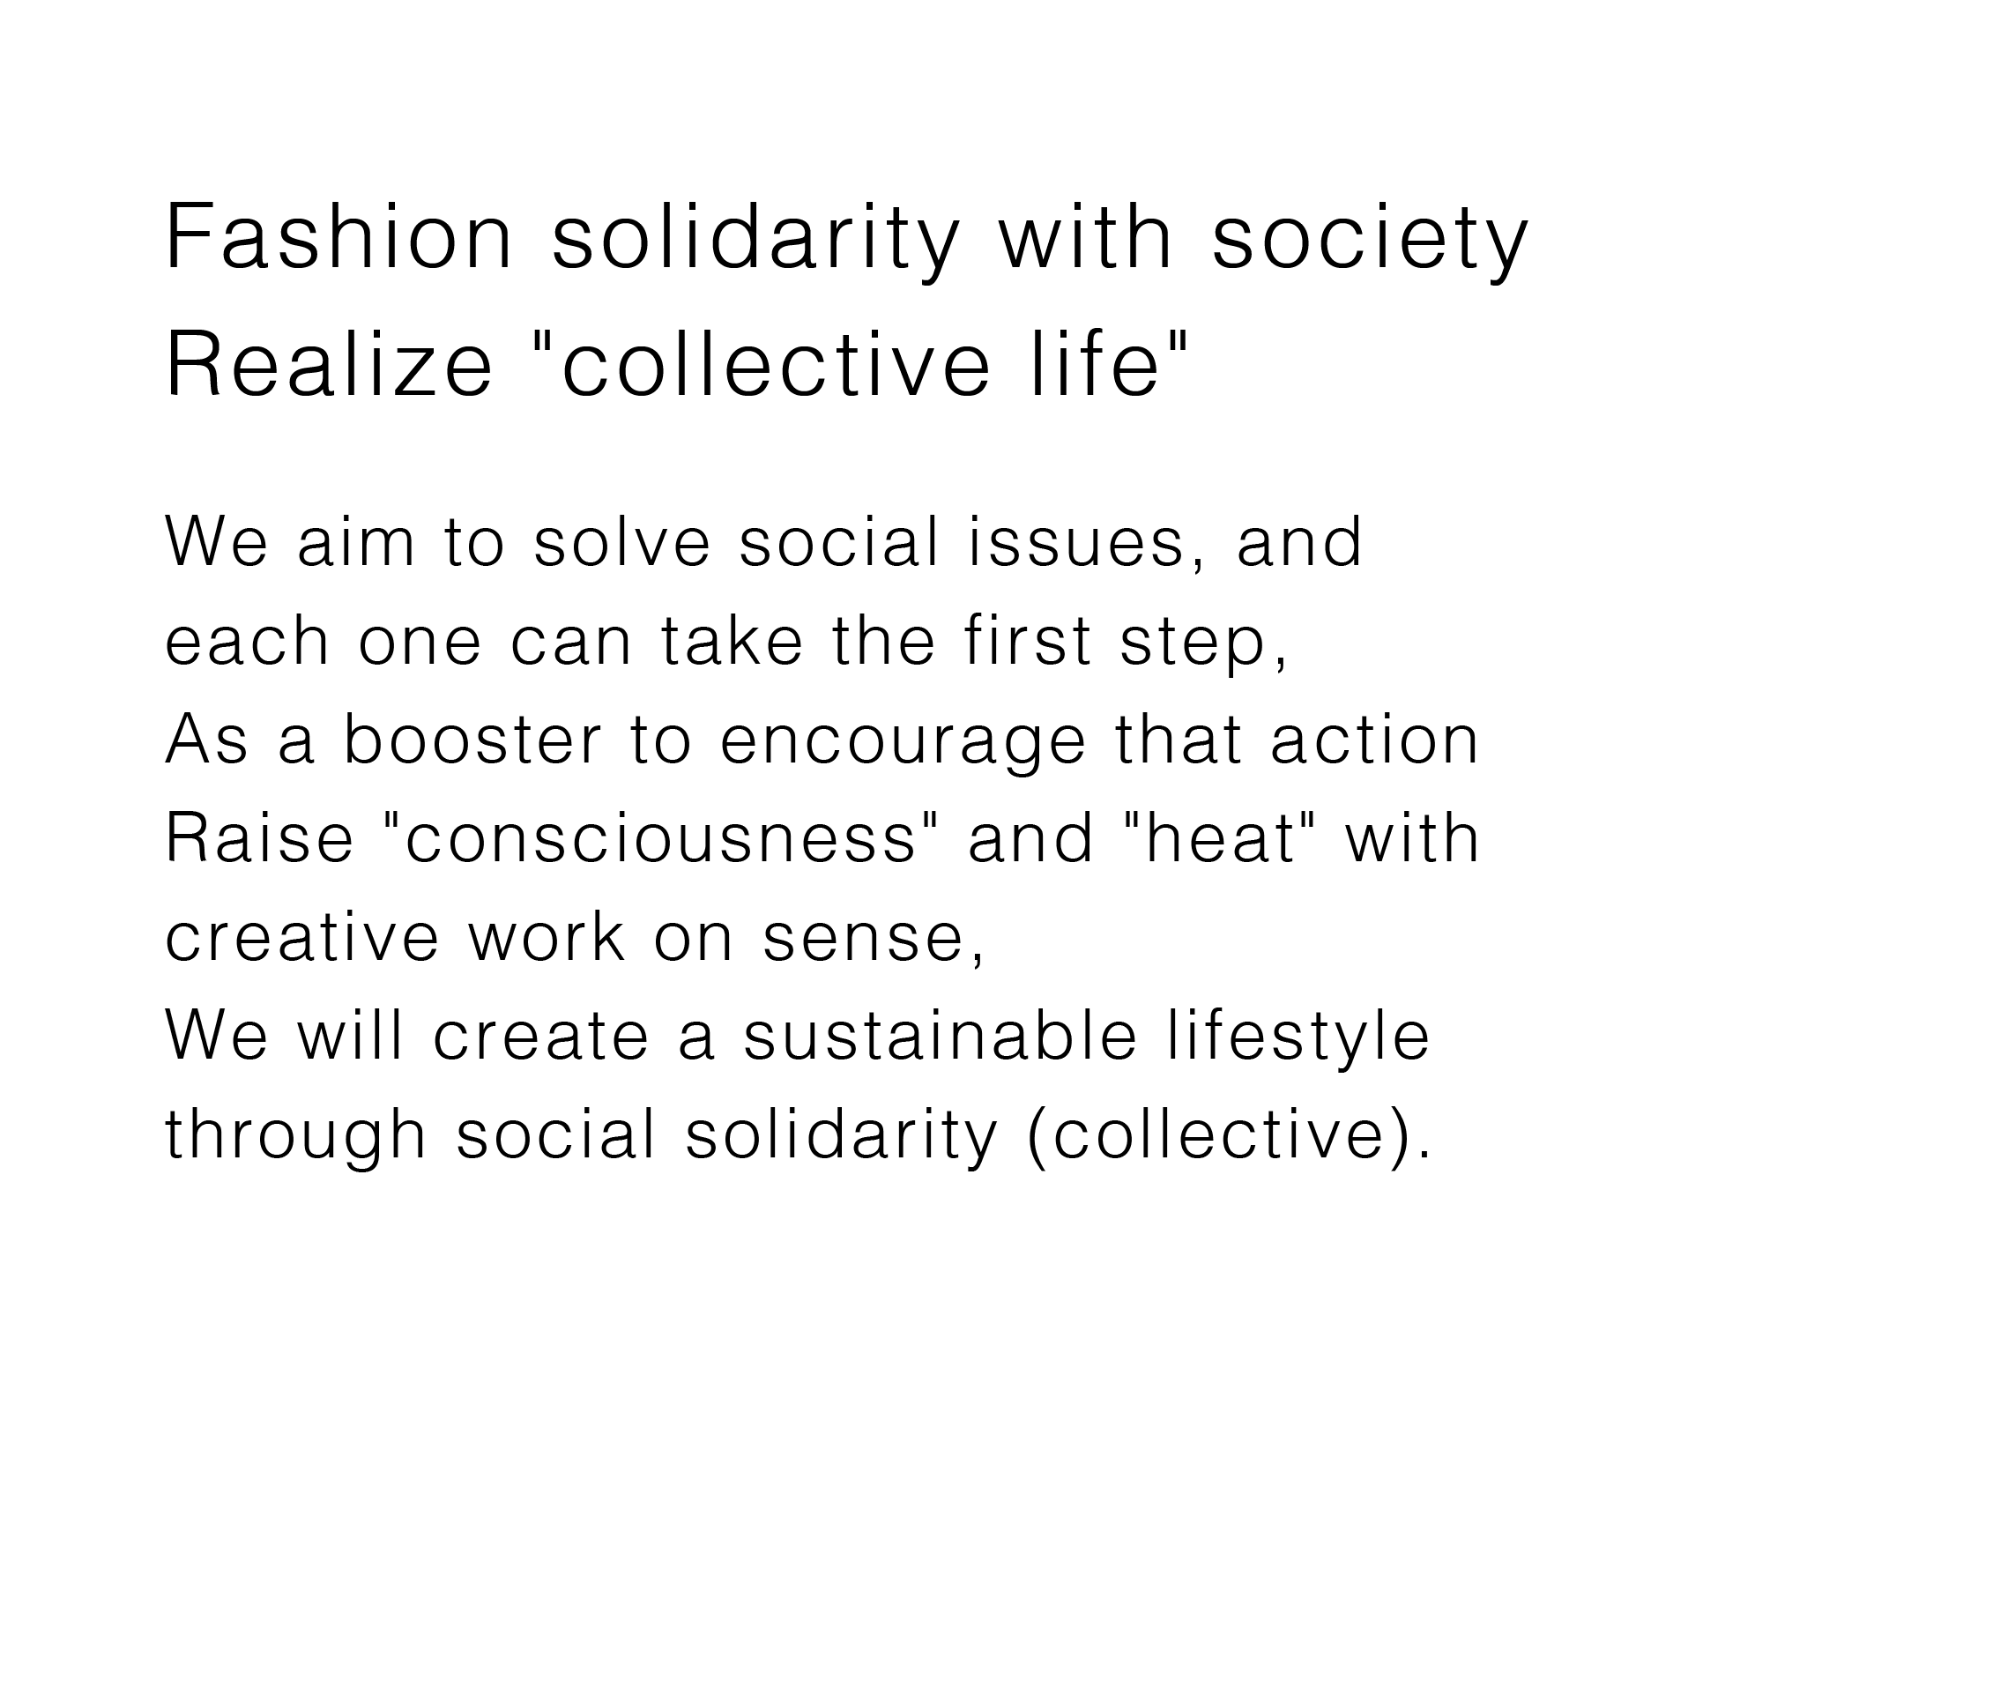 OUR MISSION - Fashion solidarity with society, Realize 'collective life' - We aim to solve social issues, and each one can take the first step, As a booster to encourage that action, Raison 'consciousness' and 'heat' with creative work on sense, We will crate a sustainable lifestyle through social solidarity (collective).